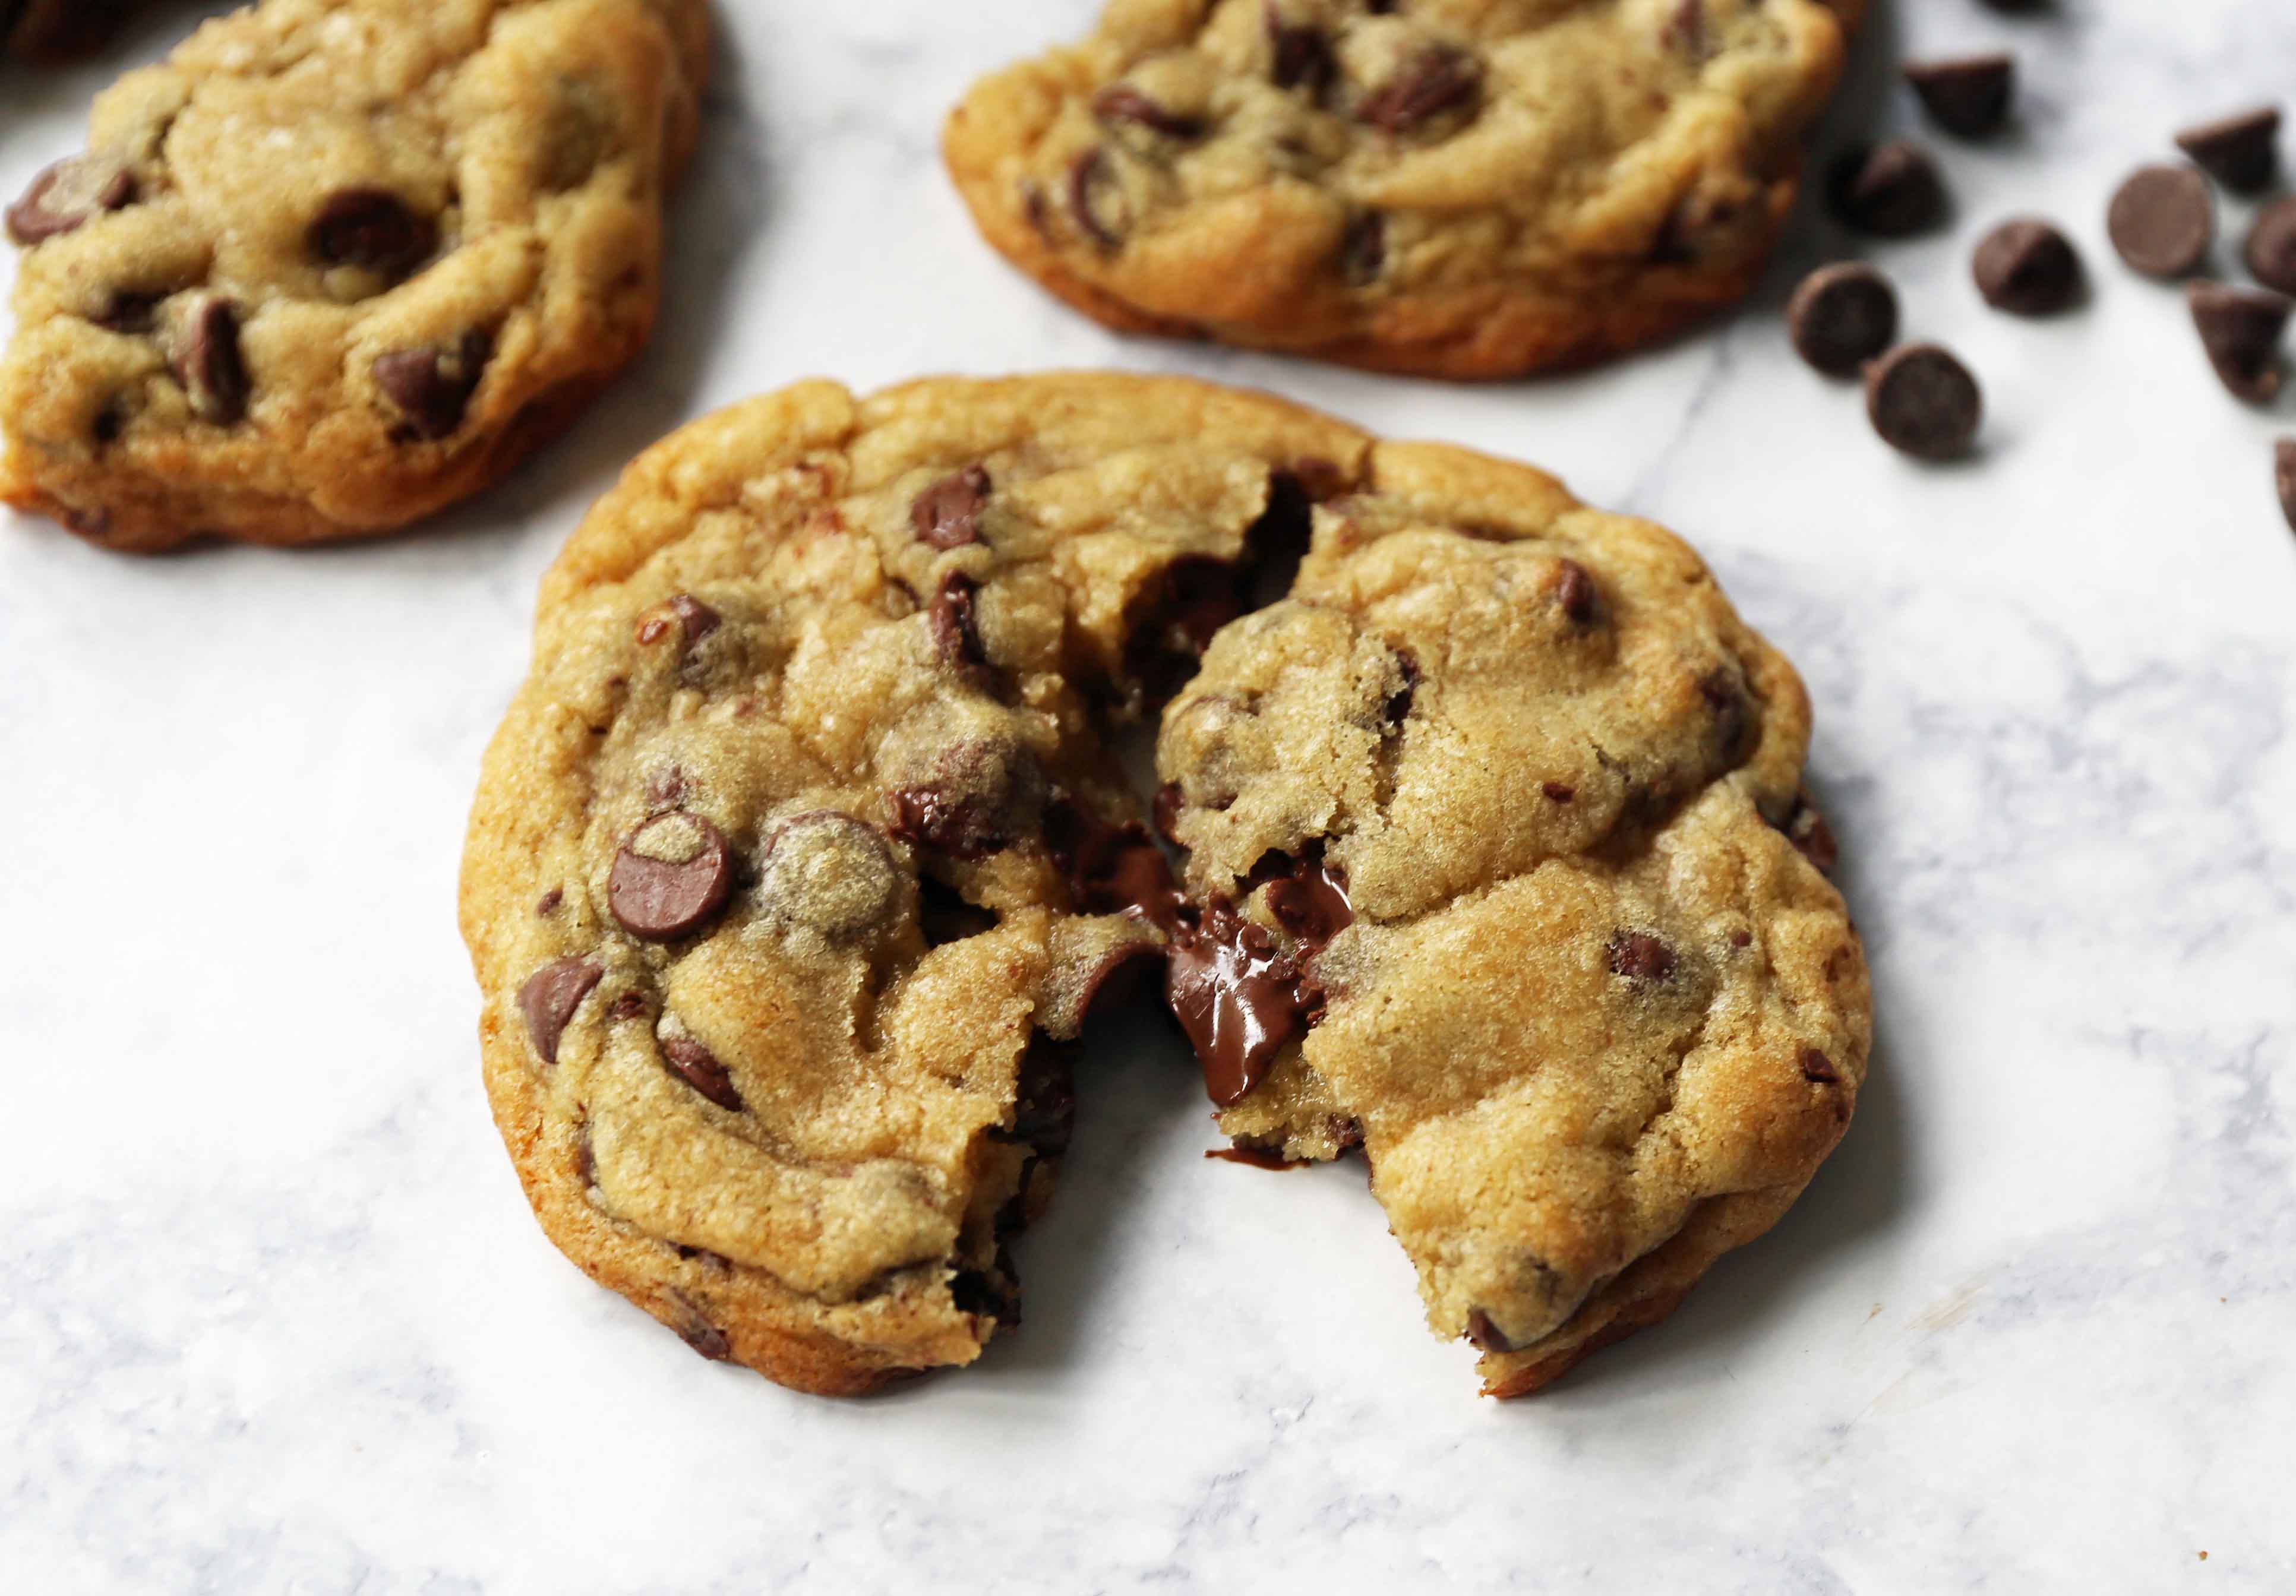 The BEST Chocolate Chip Cookie Recipe. How to make the best chocolate chip cookies in the world. These are hands down the most perfect chocolate chip cookies! Tips and tricks for making the best chocolate chip cookies. www.modernhoney.com #cookie #cookies #chocolatechipcookie #chocolatechipcookies #homemade #cookierecipe #bestchocolatechipcookies